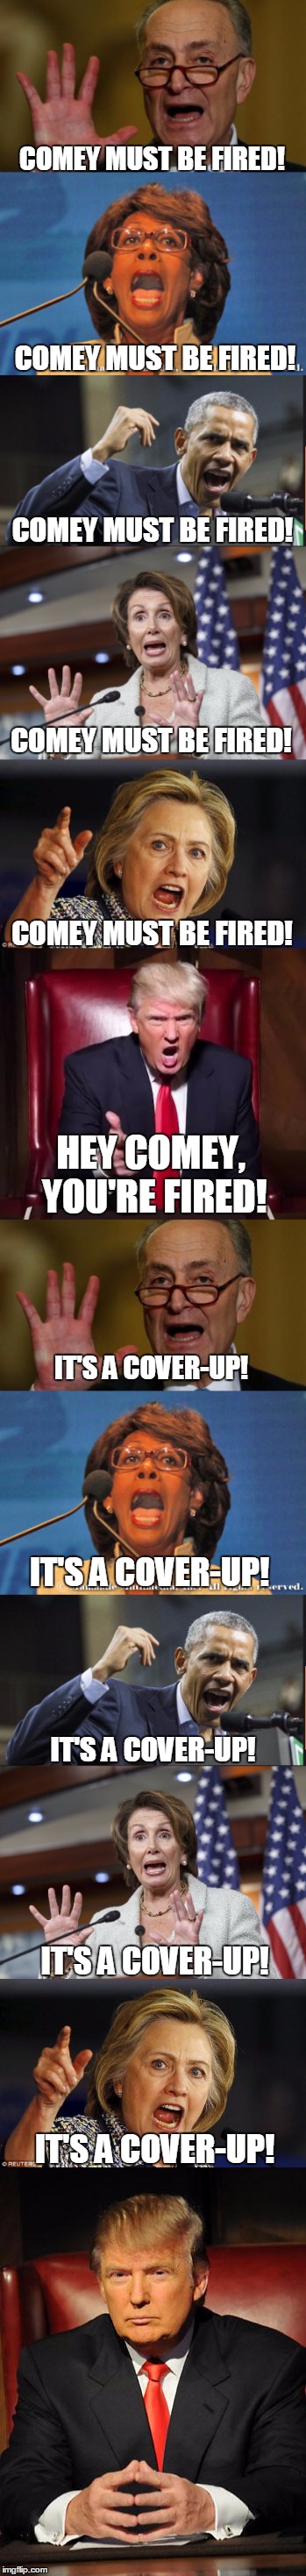 I'd like a refill on my hypocrisy, please. | COMEY MUST BE FIRED! COMEY MUST BE FIRED! COMEY MUST BE FIRED! COMEY MUST BE FIRED! COMEY MUST BE FIRED! HEY COMEY, YOU'RE FIRED! IT'S A COVER-UP! IT'S A COVER-UP! IT'S A COVER-UP! IT'S A COVER-UP! IT'S A COVER-UP! | image tagged in donald trump,james comey,liberal hypocrisy,hillary clinton,democrats,liars | made w/ Imgflip meme maker